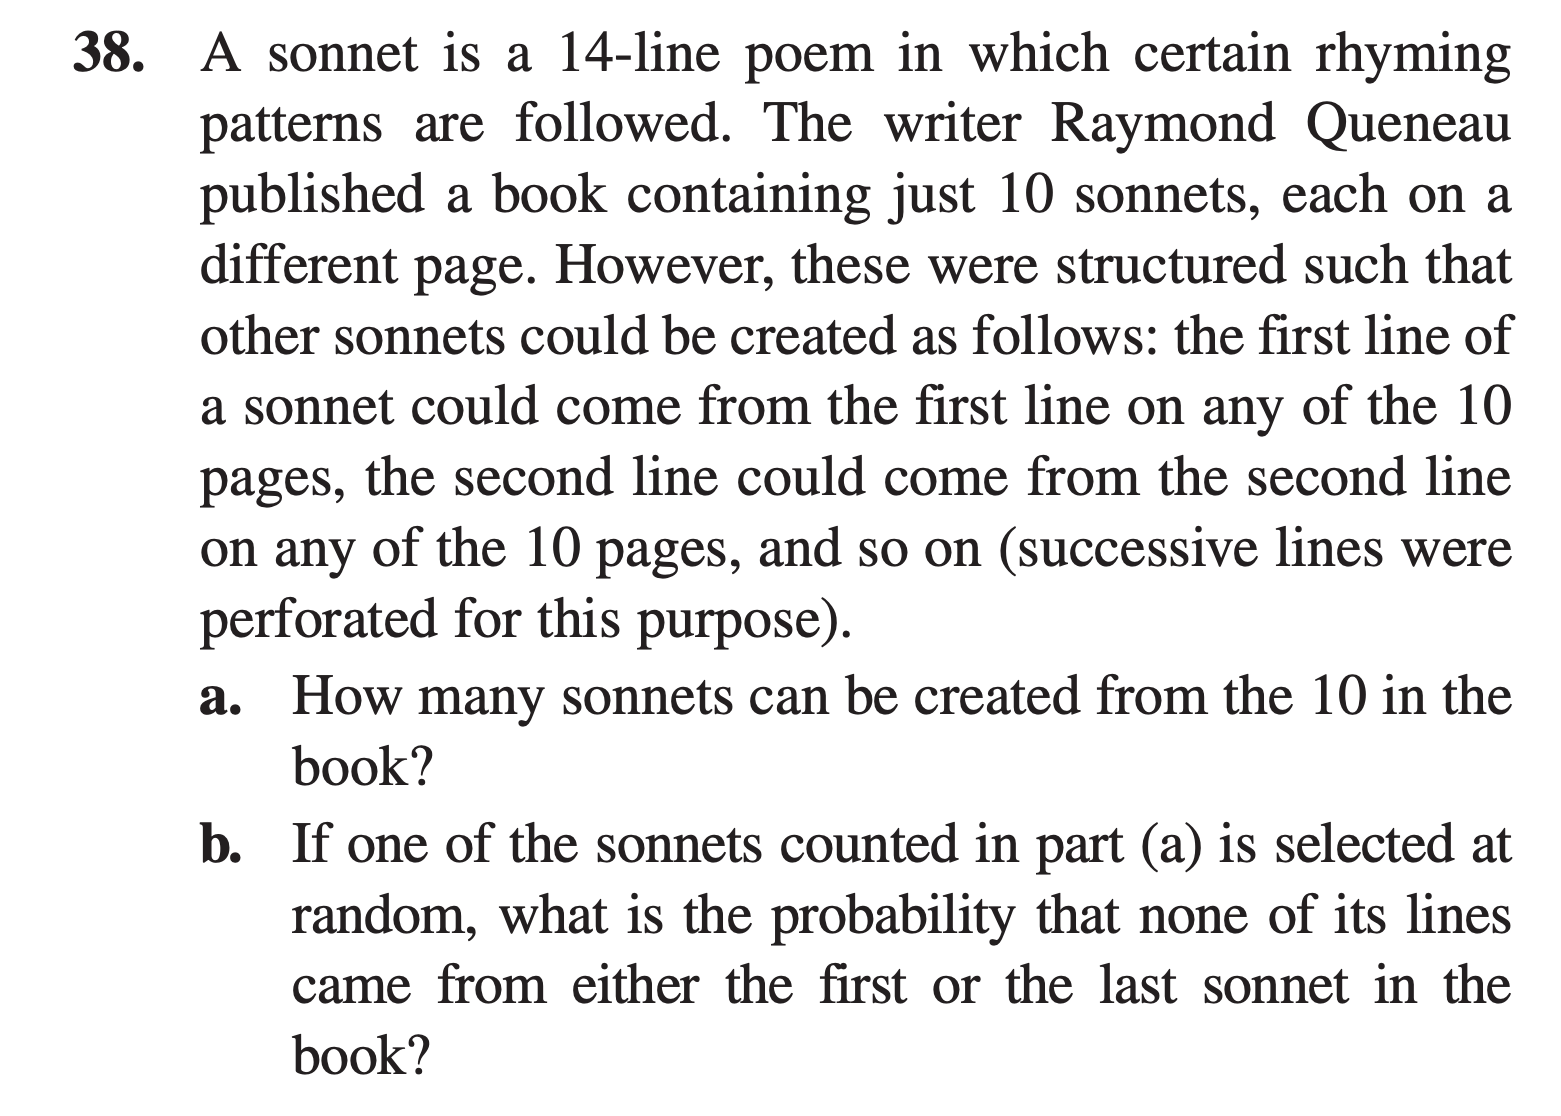 A sonnet is a 14-line poem in which certain rhyming
patterns are followed. The writer Raymond Queneau
published a book containing just 10 sonnets, each on a
different page. However, these were structured such that
other sonnets could be created as follows: the first line of
a sonnet could come from the first line on any of the 10
pages,
the second line could come from the second line
on any of the 10 pages, and so on (successive lines were
perforated for this purpose).
